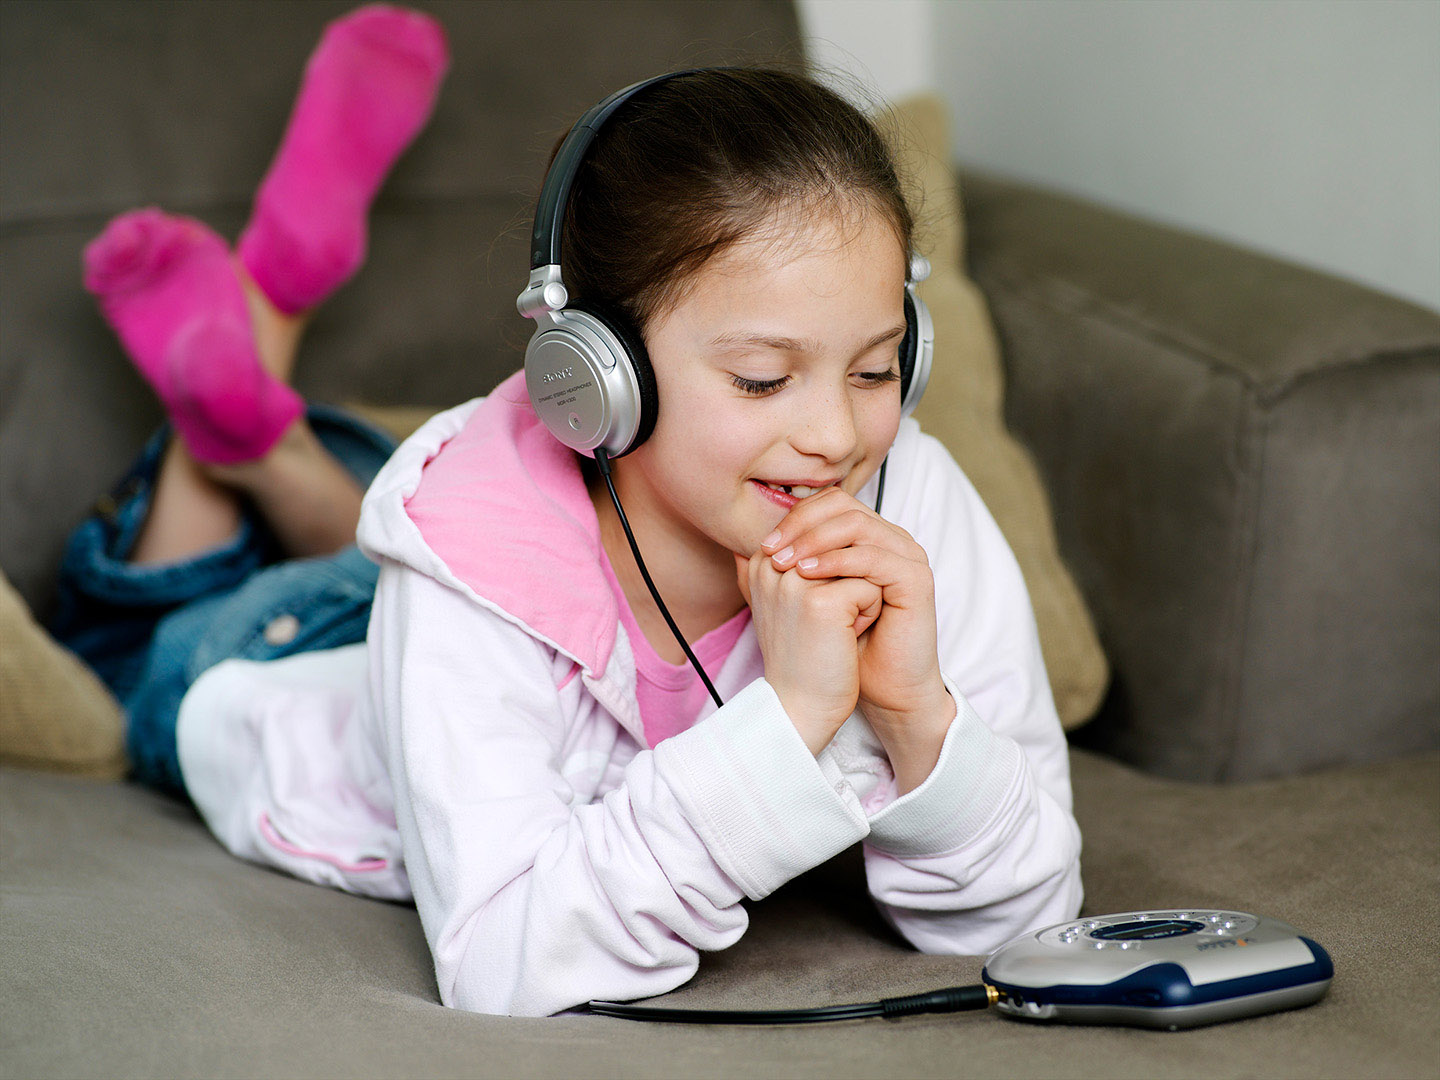 Young girl listening to music on headphones